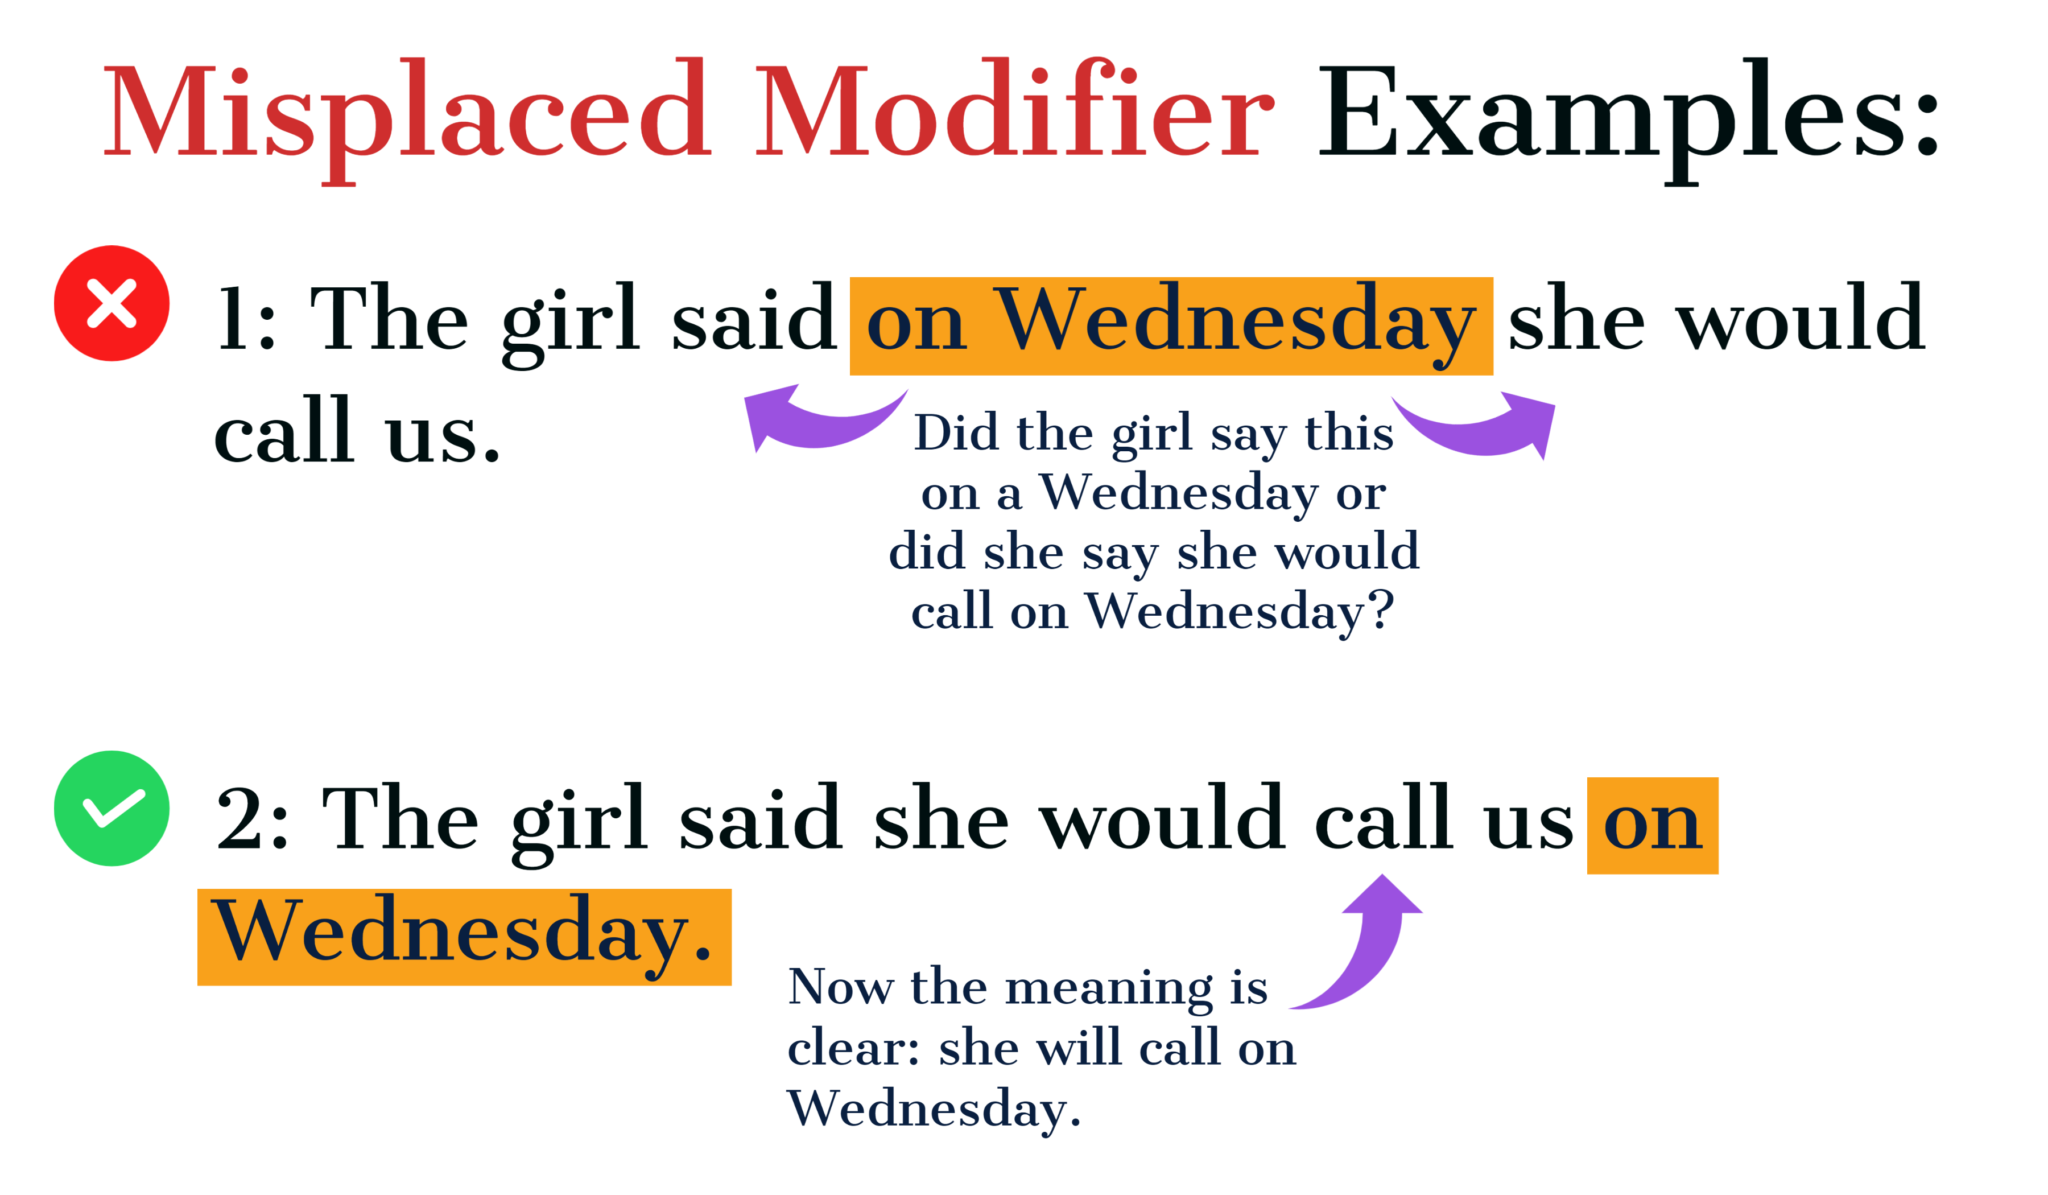 dangling-modifiers-misplaced-modifiers-and-illogical-wording-the